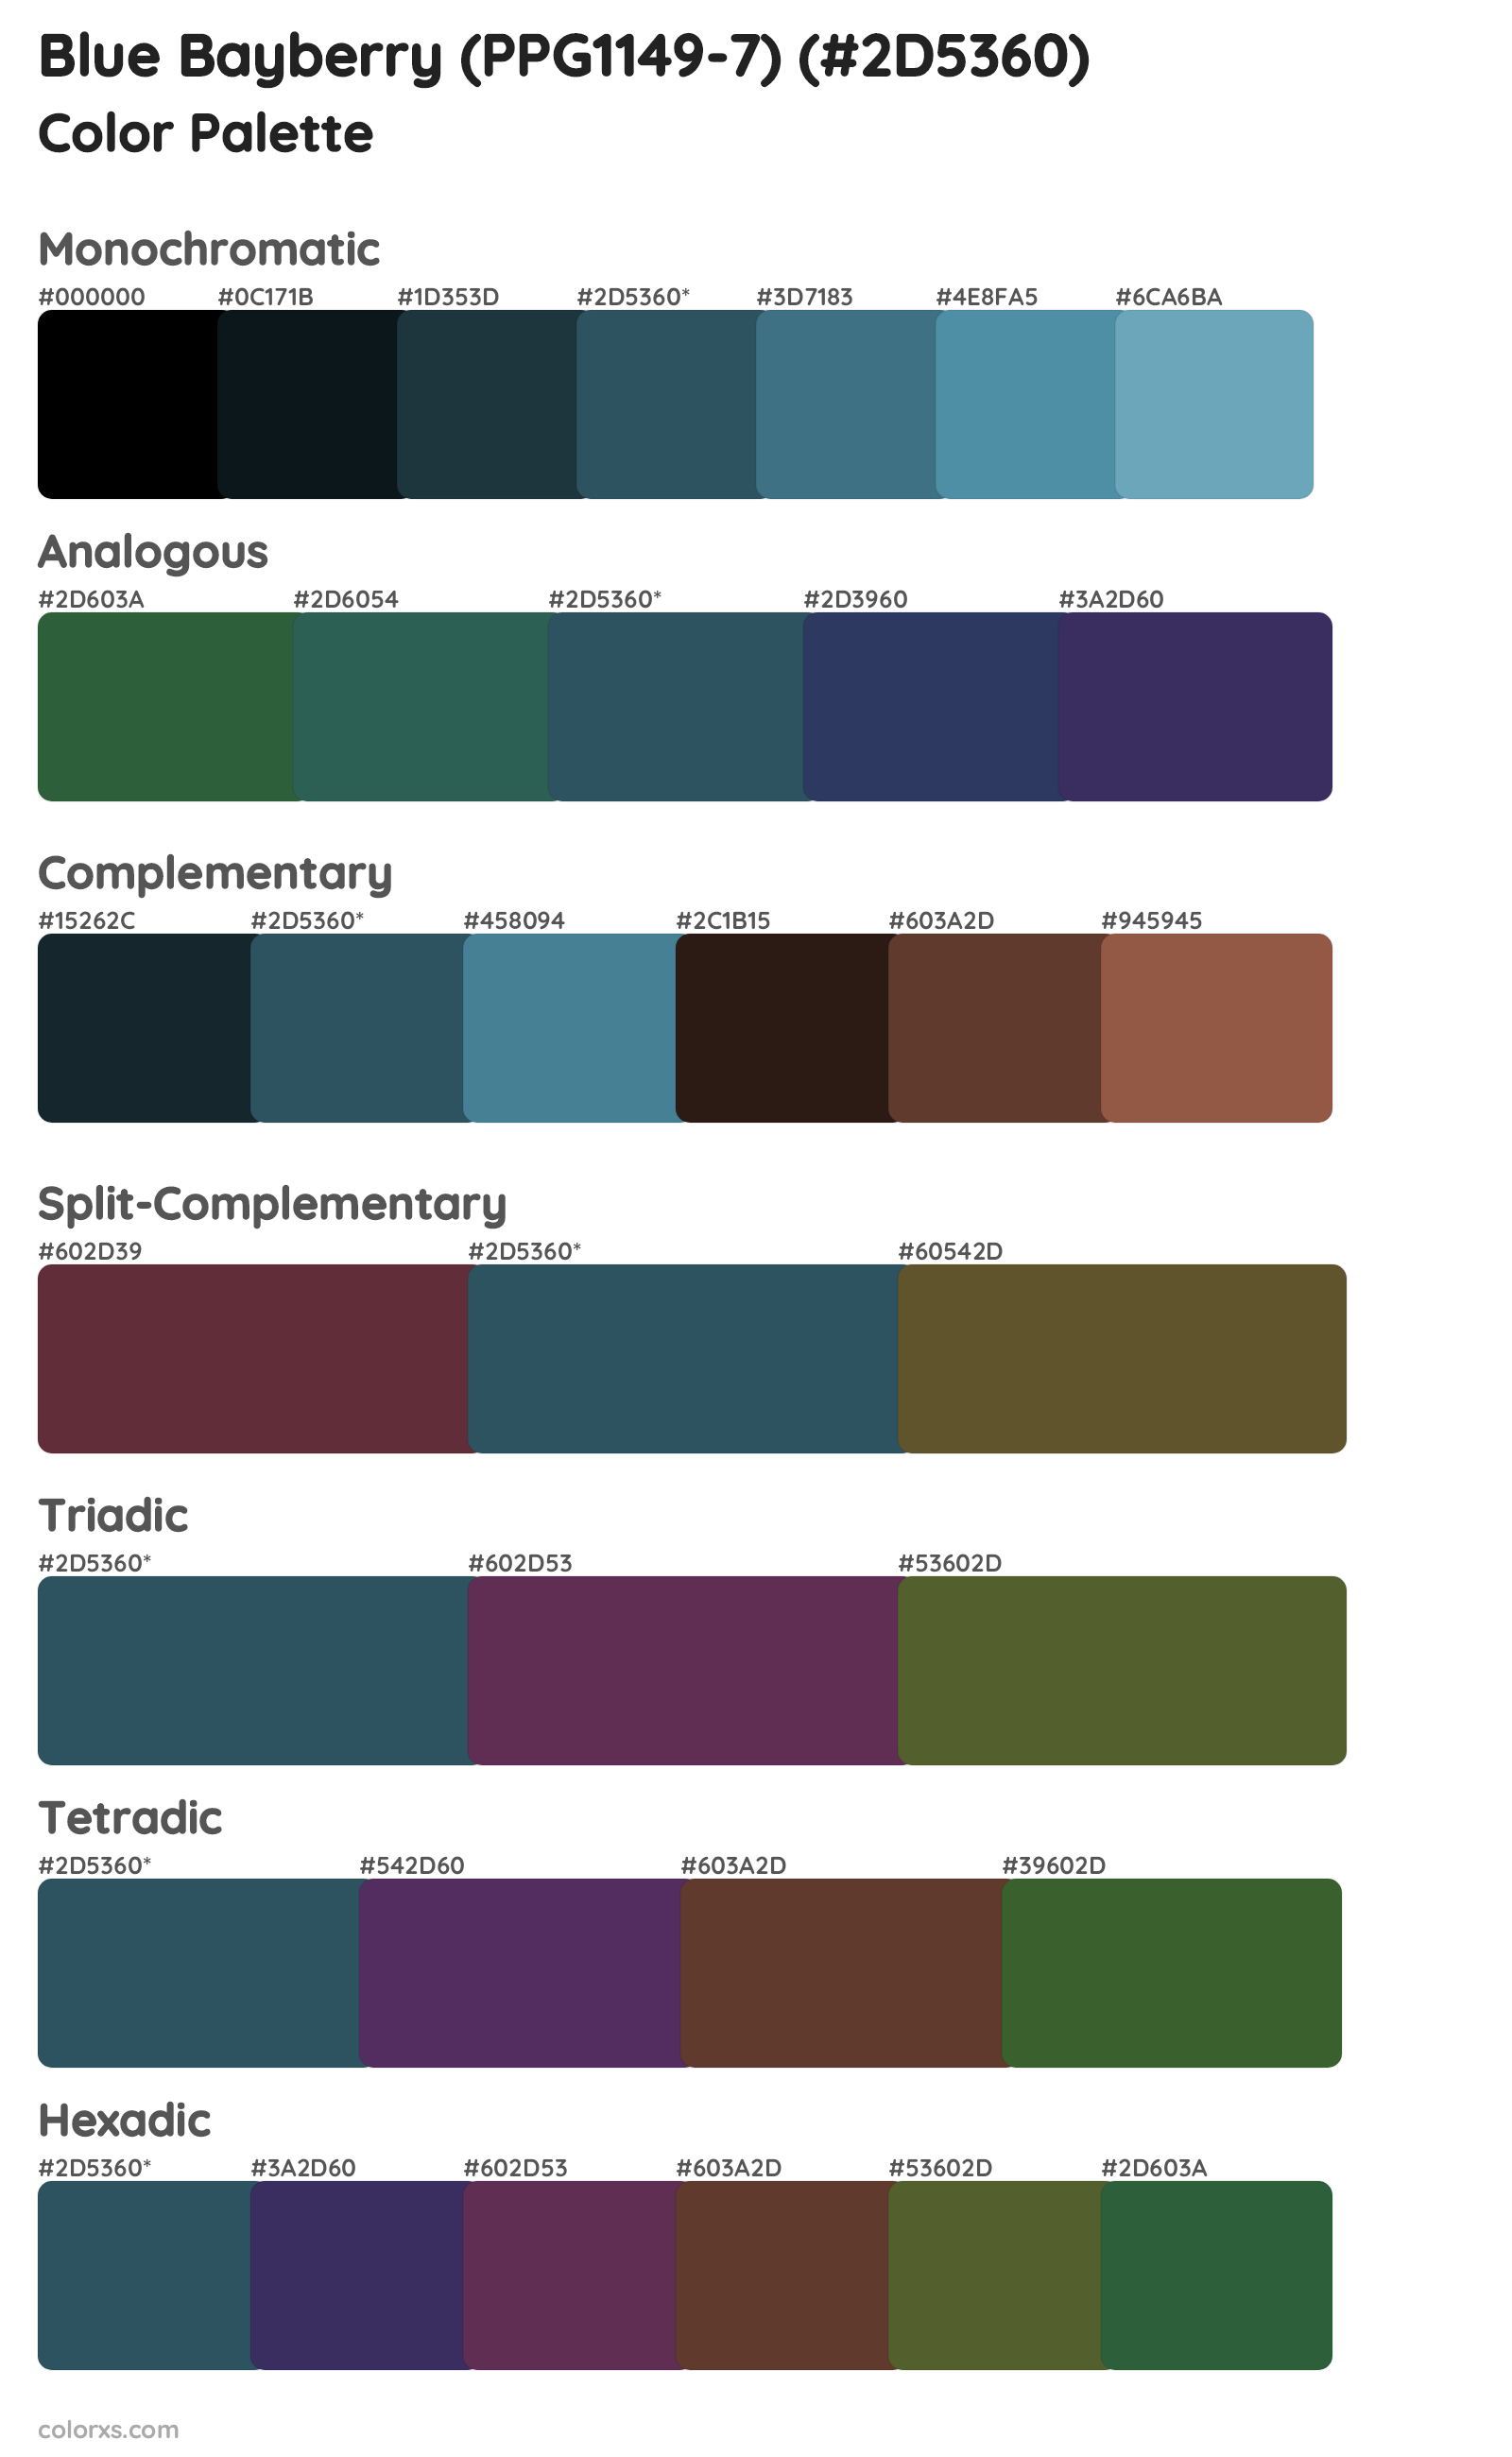 Blue Bayberry (PPG1149-7) Color Scheme Palettes